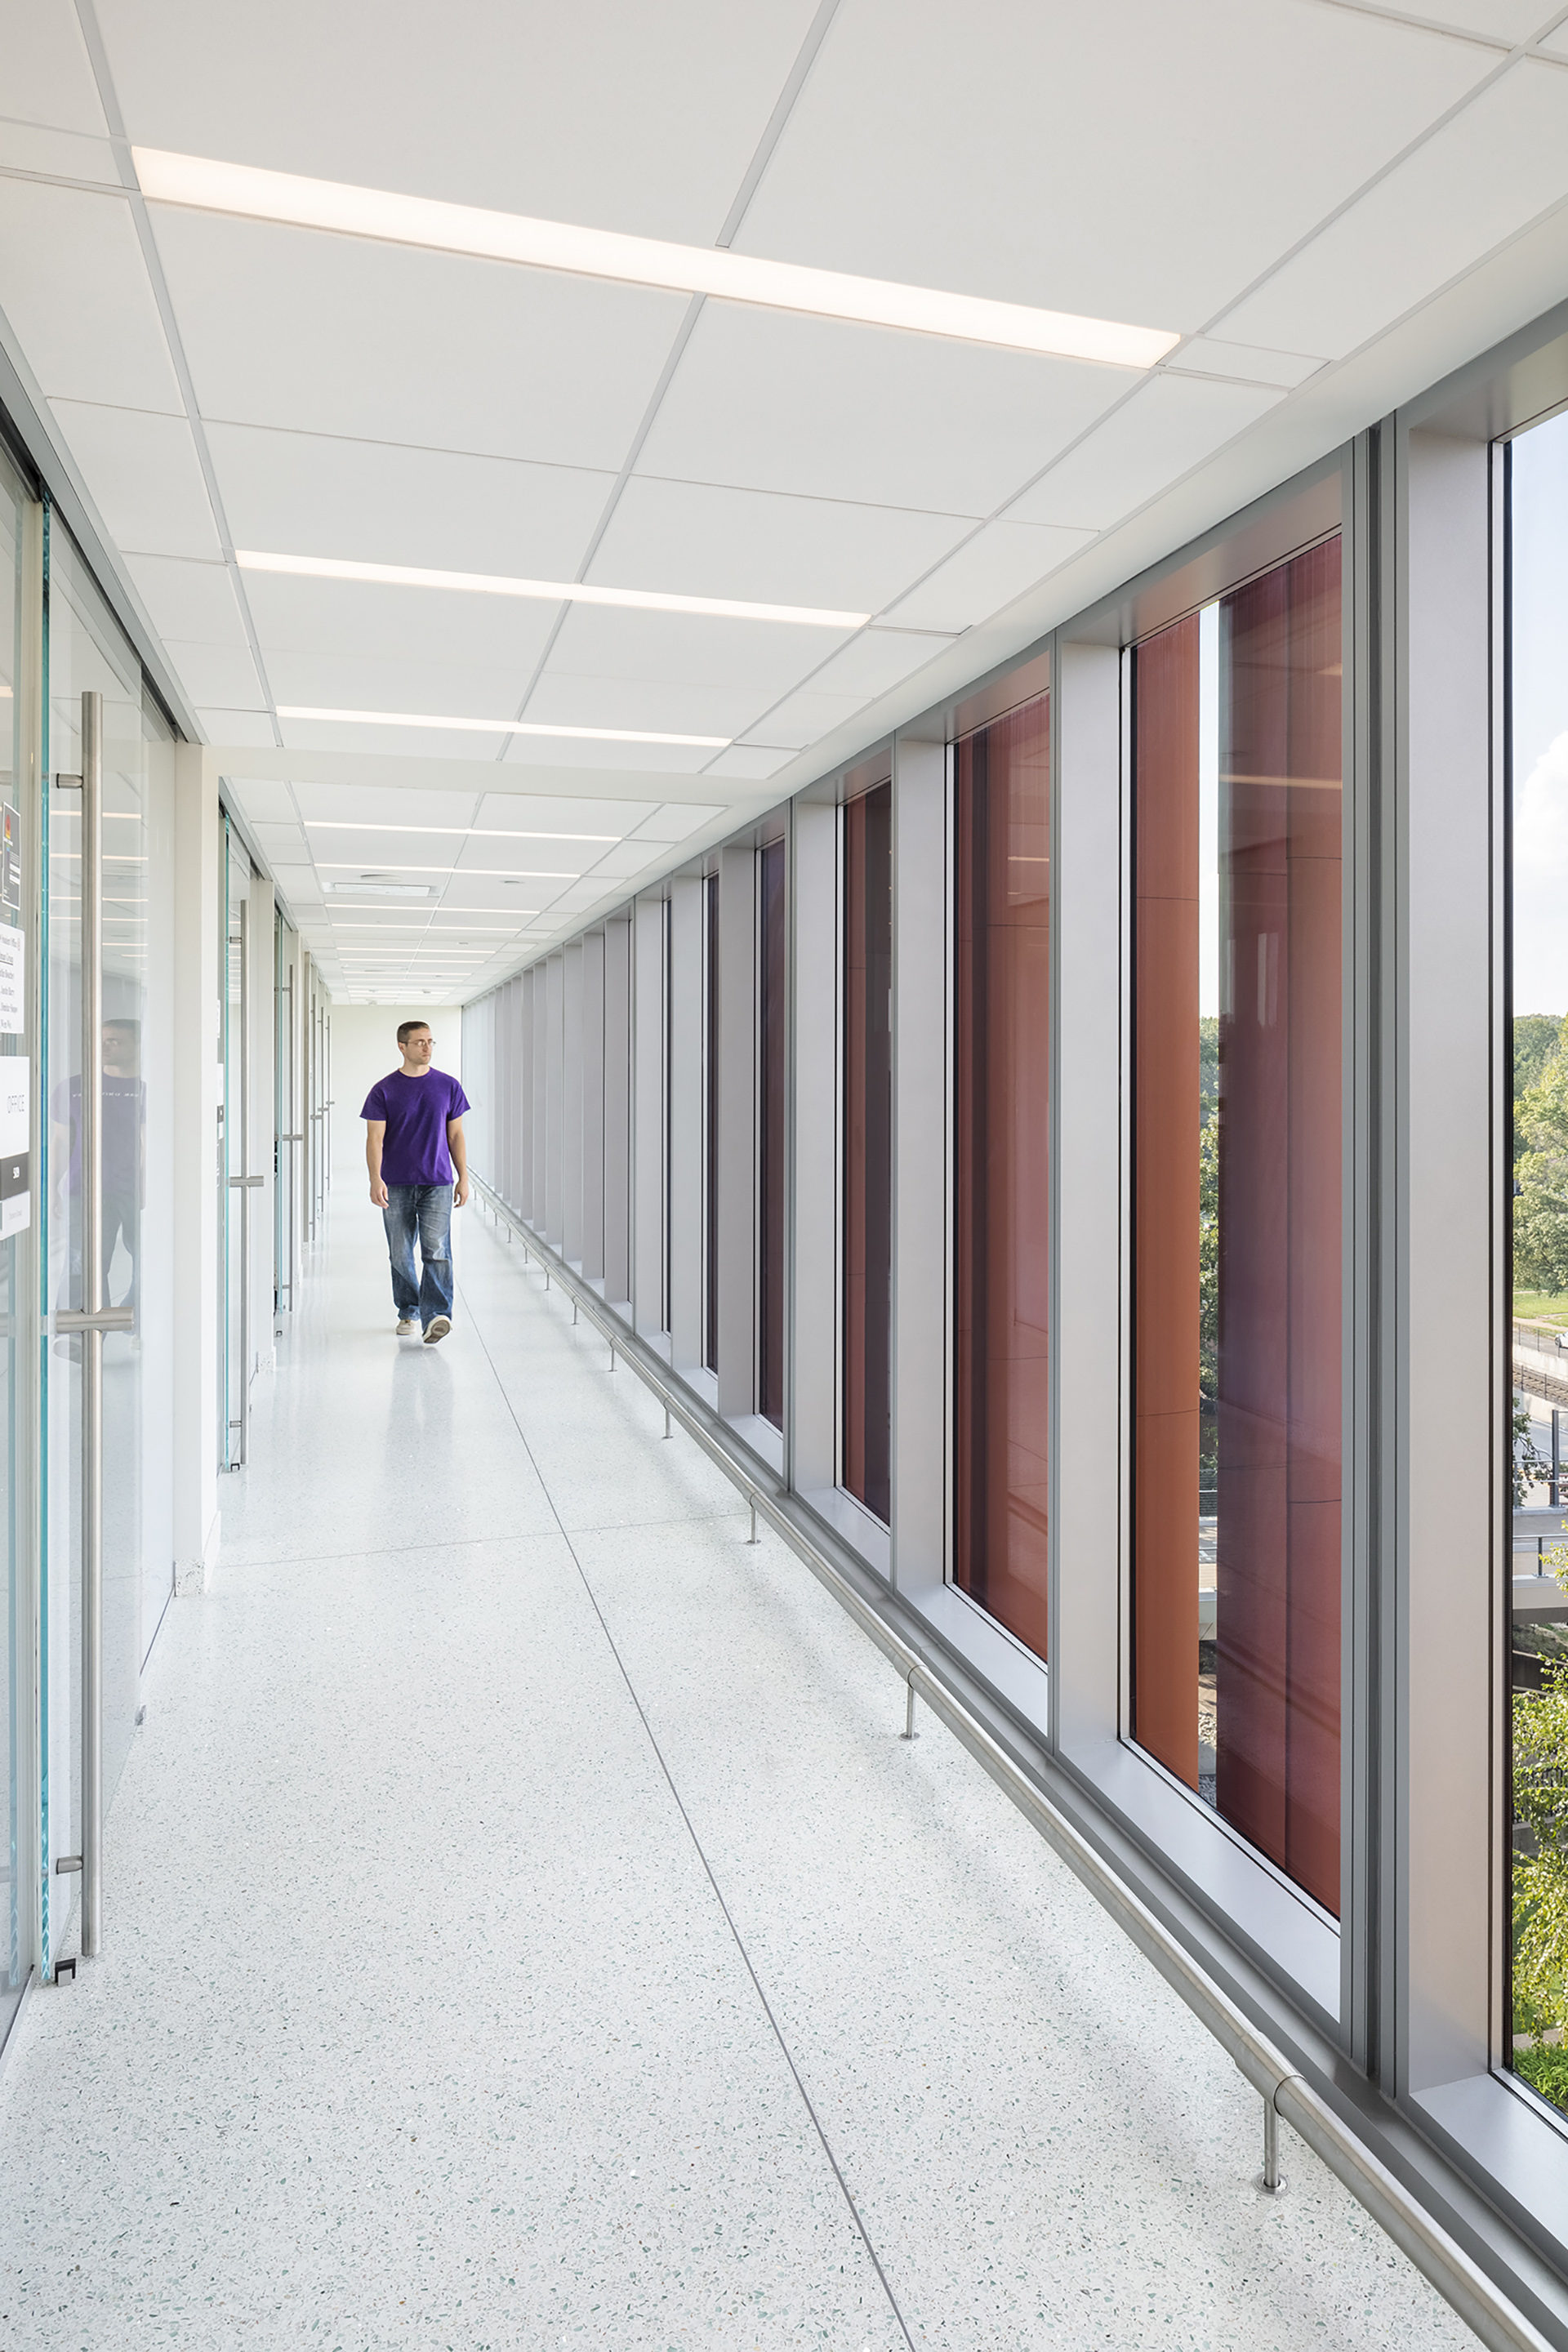 washington university bryan hall corridor designed by trivers architectural firm